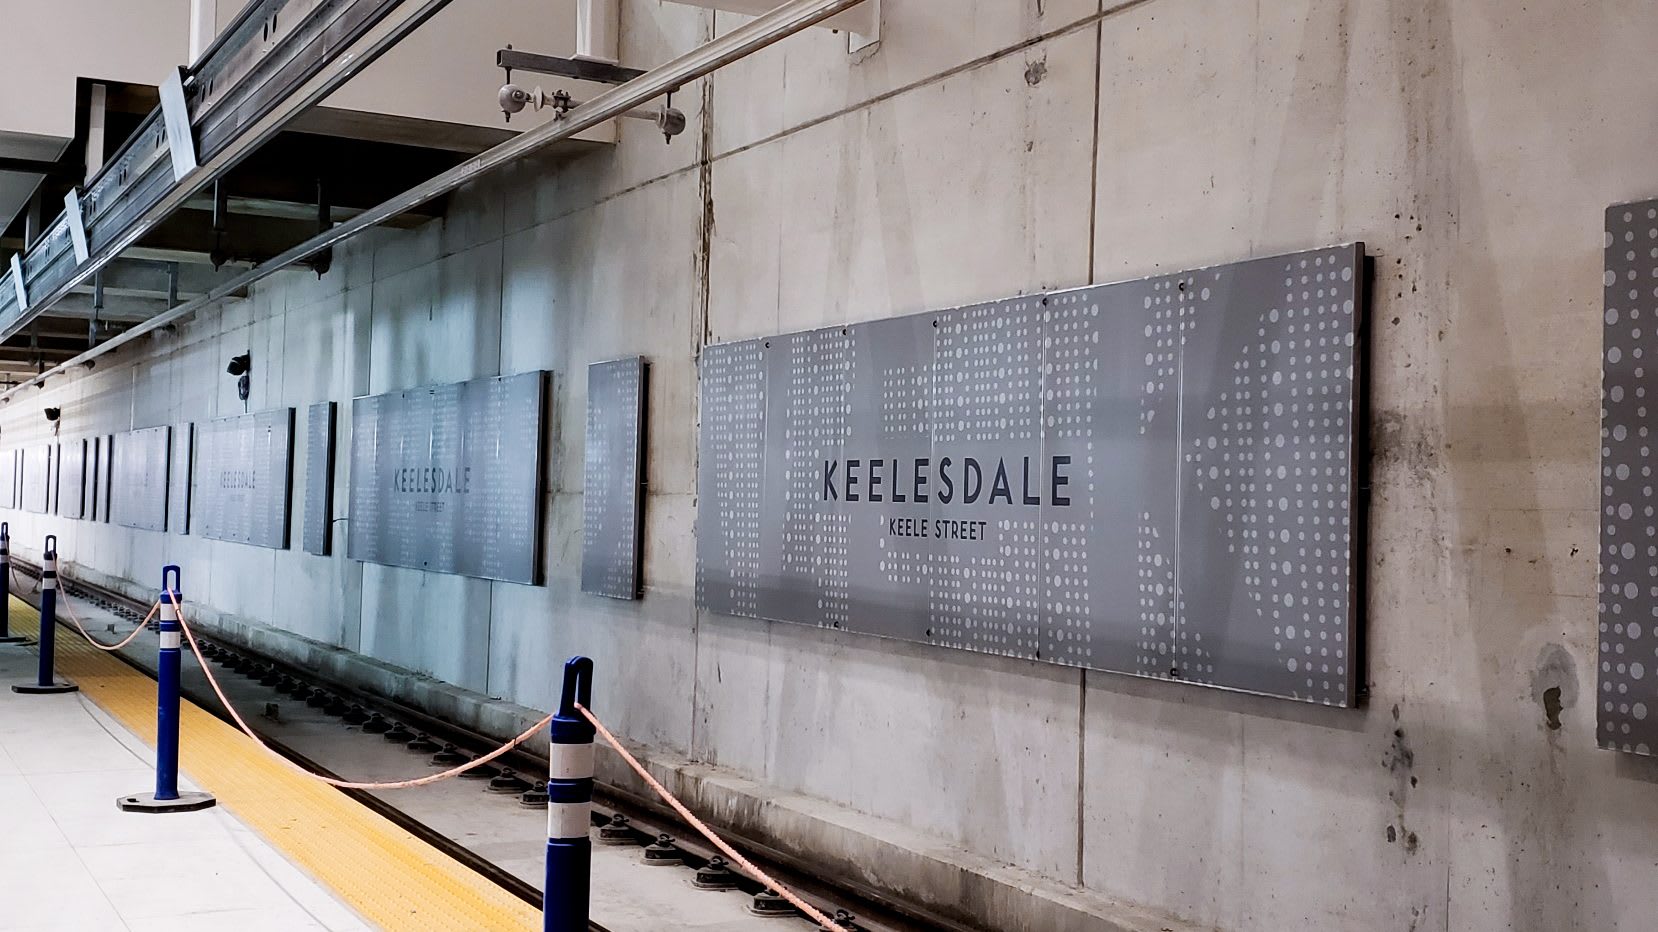 photo from the train platform in Keelesdale station showing a sign with the station name